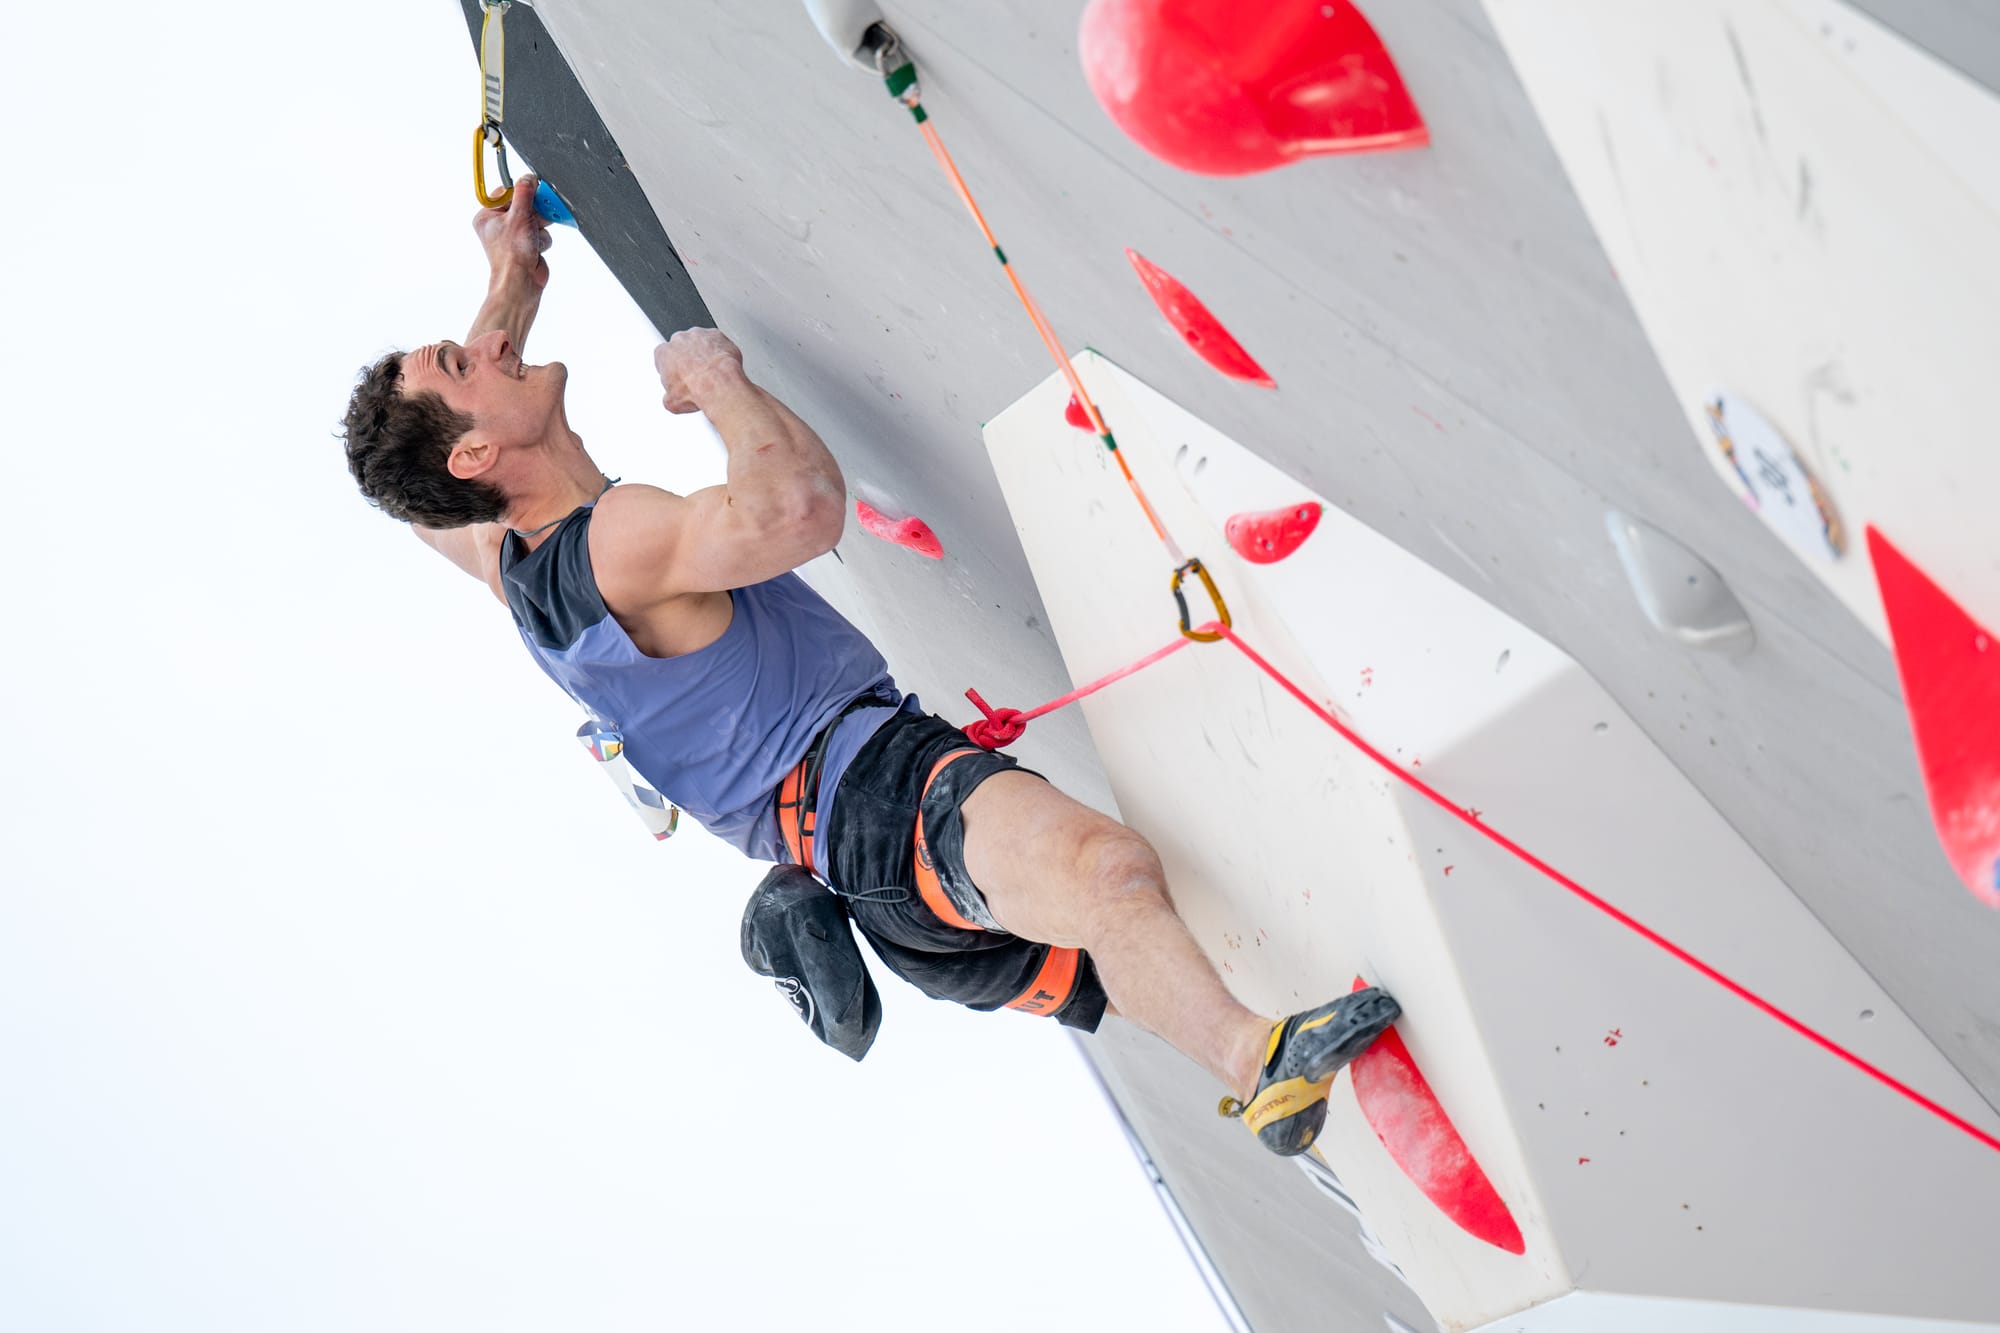 Ondra fighting on the Male final Lead route before falling